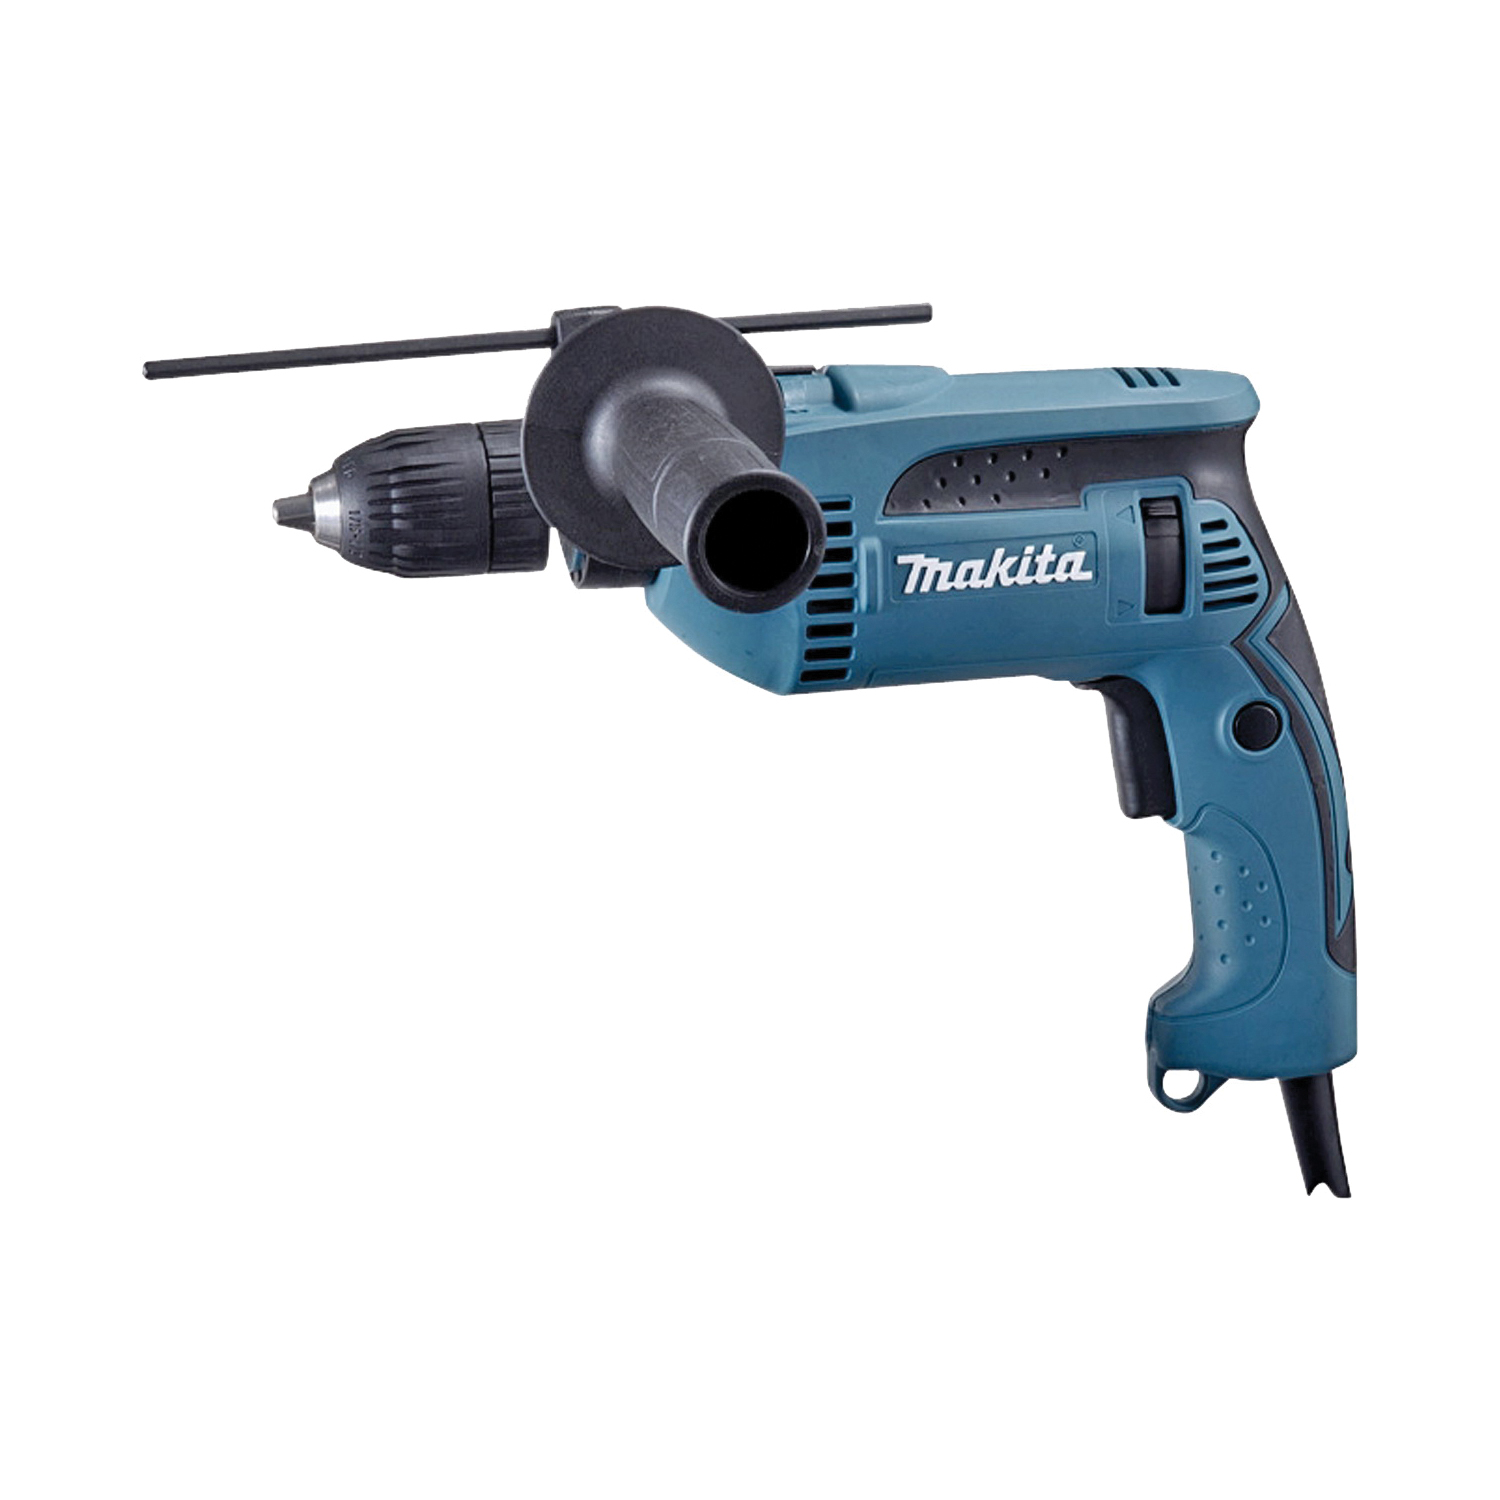 Buy Rockwell SS3105 Hammer Drill, 7 A, 1/2 in Chuck, 0 to 44,800